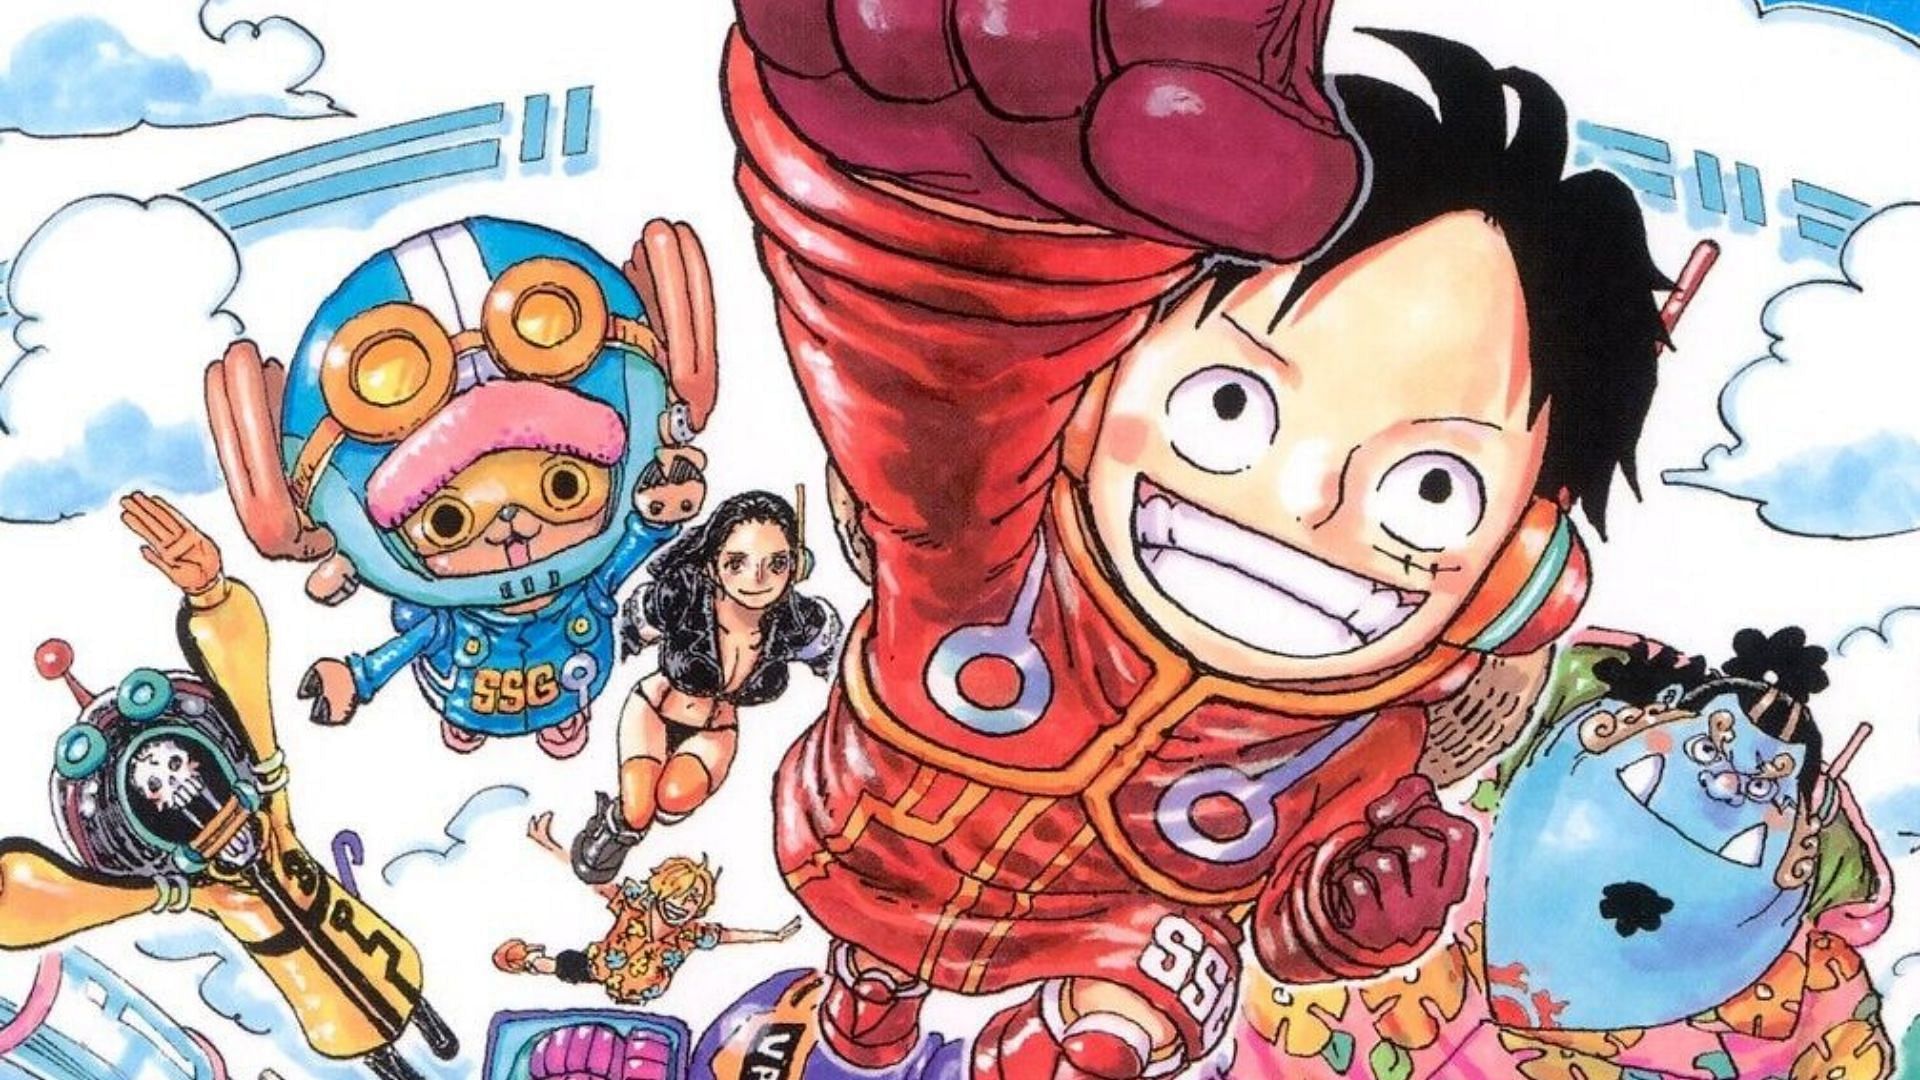 One Piece' confirms start date for Egghead's arc in anime